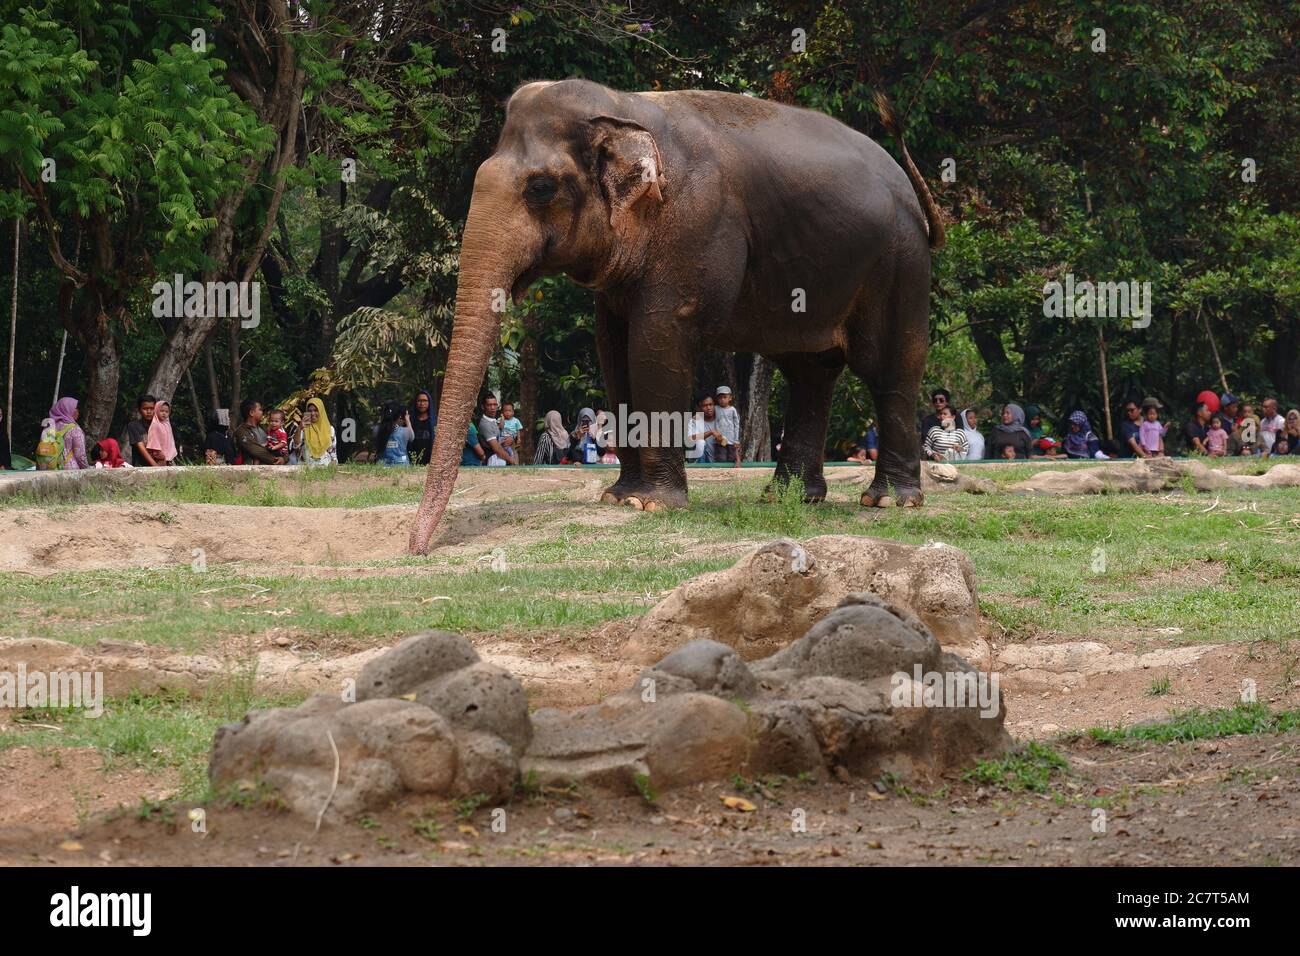 The Sumatran elephant is one of three recognized subspecies of the Asian elephant, and native to the Indonesia island of Sumatra : Jakarta, Indonesia Stock Photo